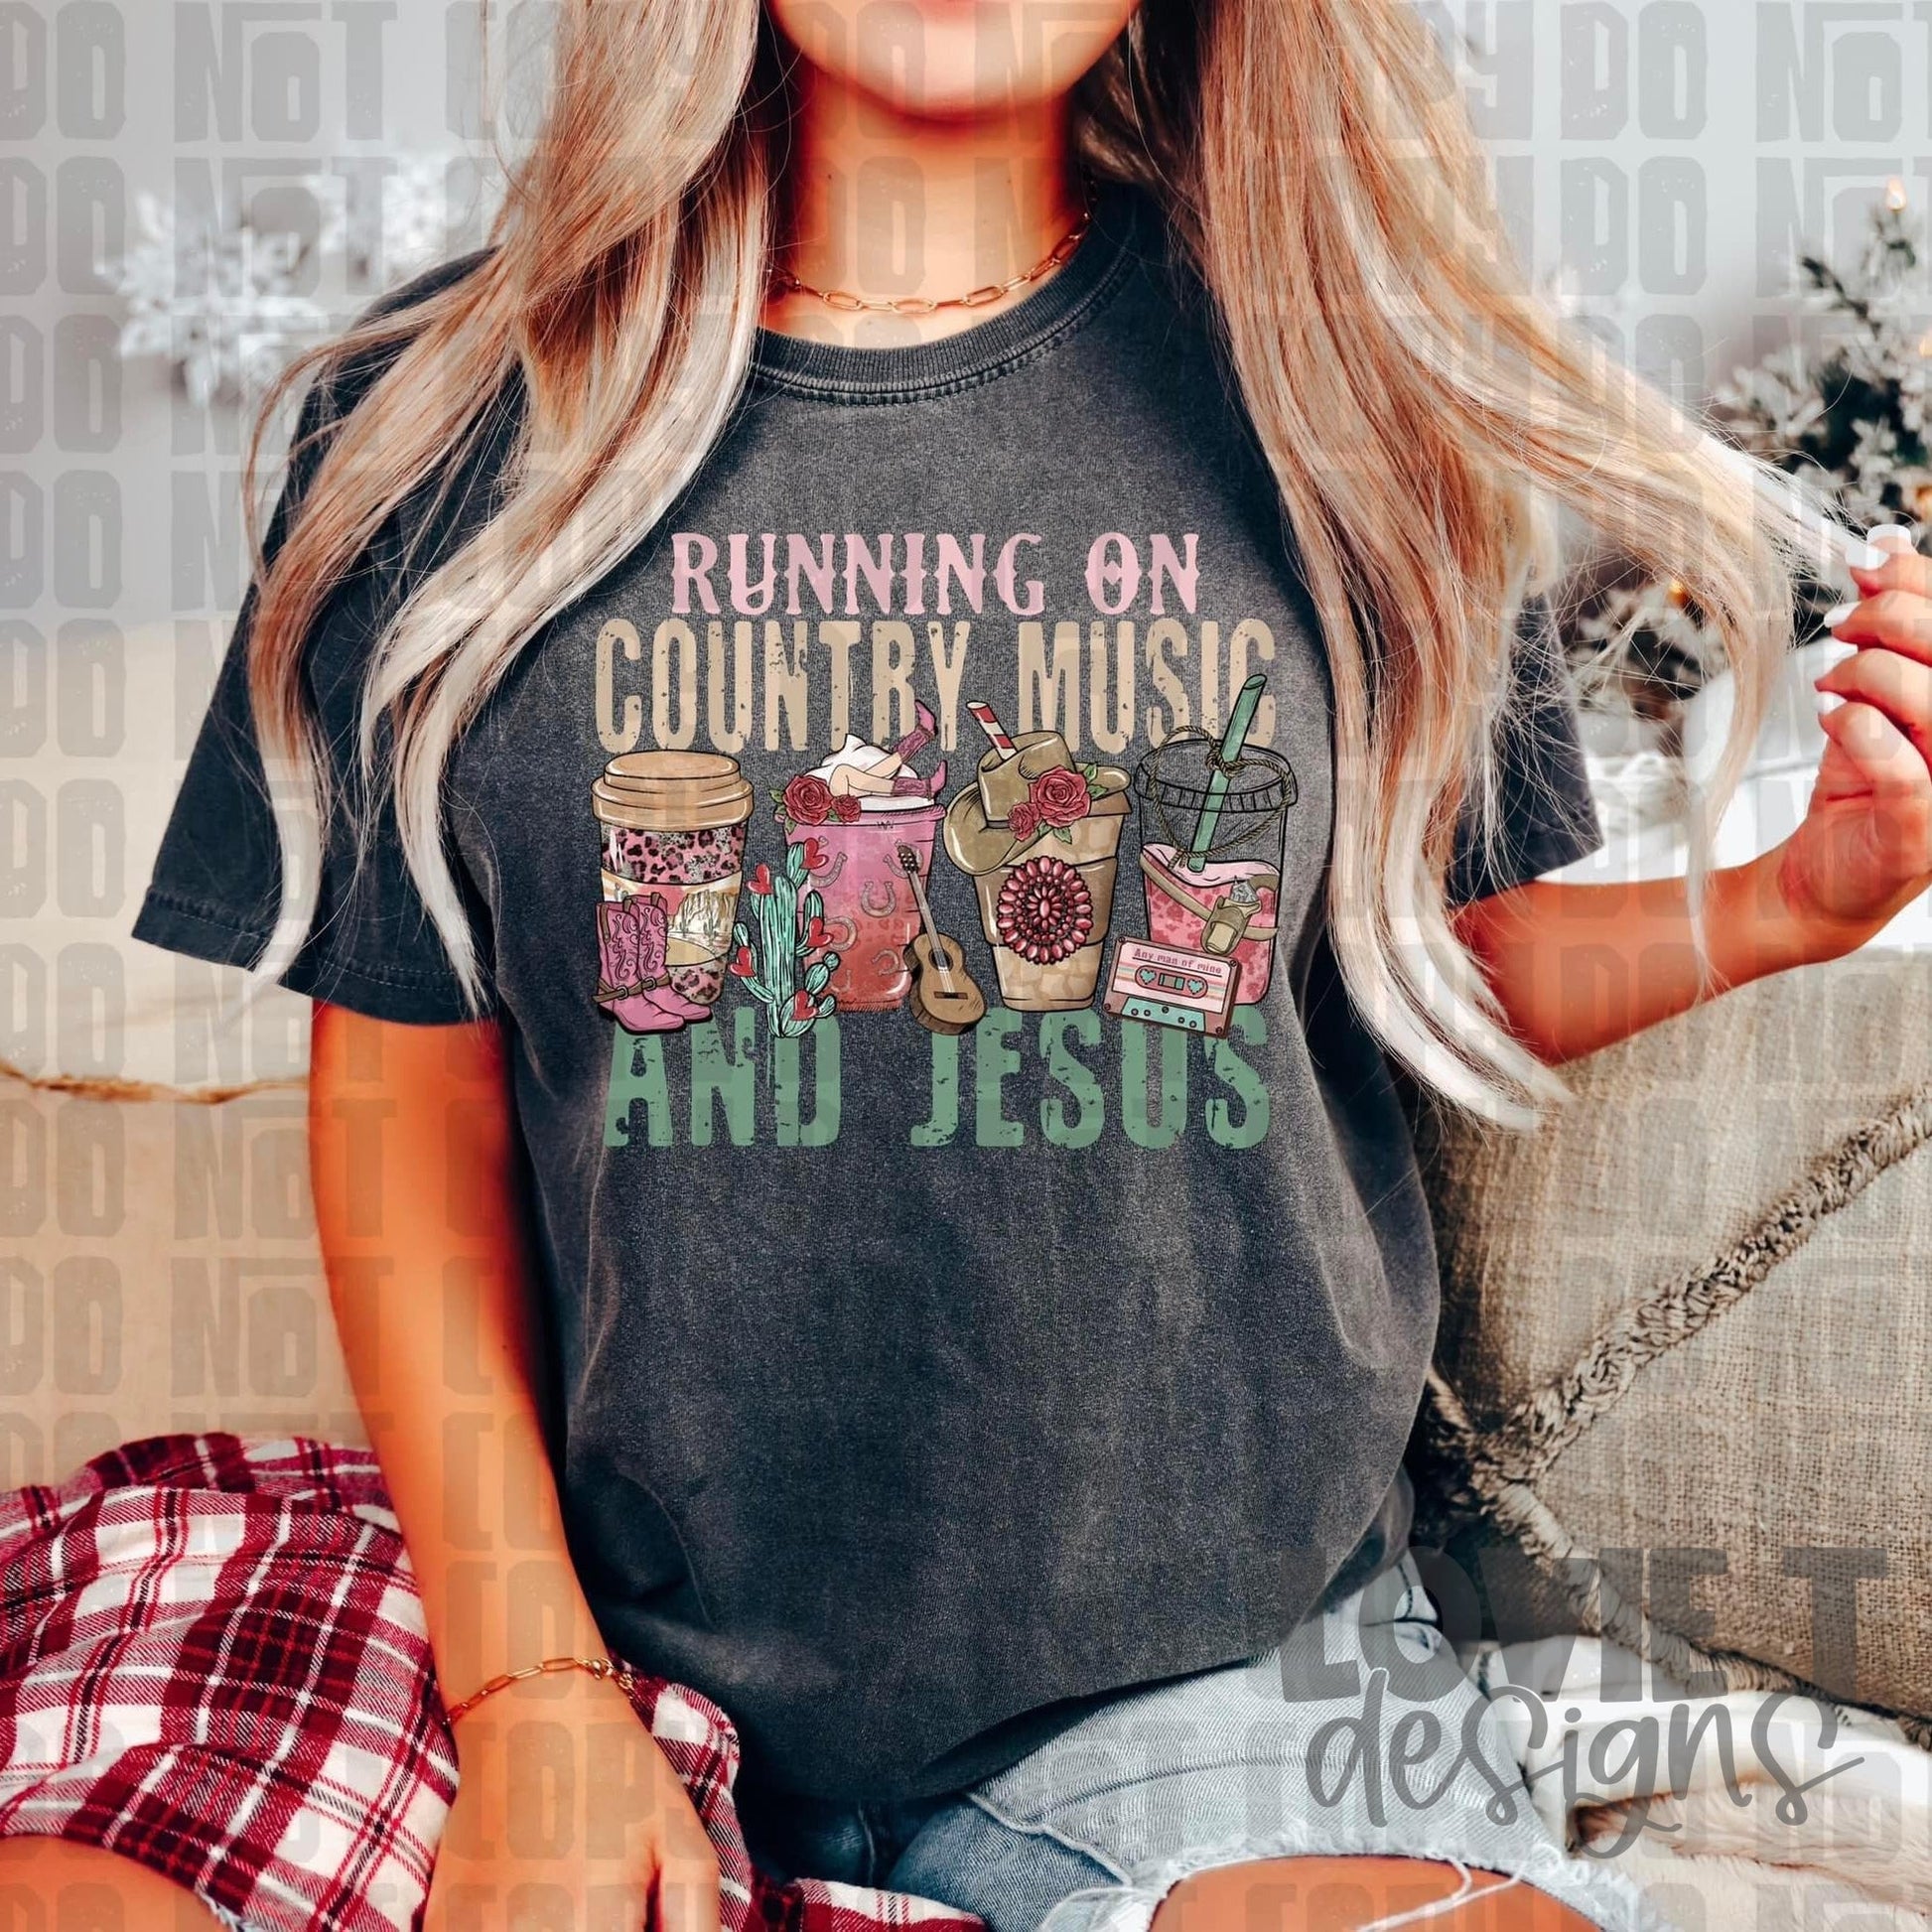 Running On Country Music And Jesus